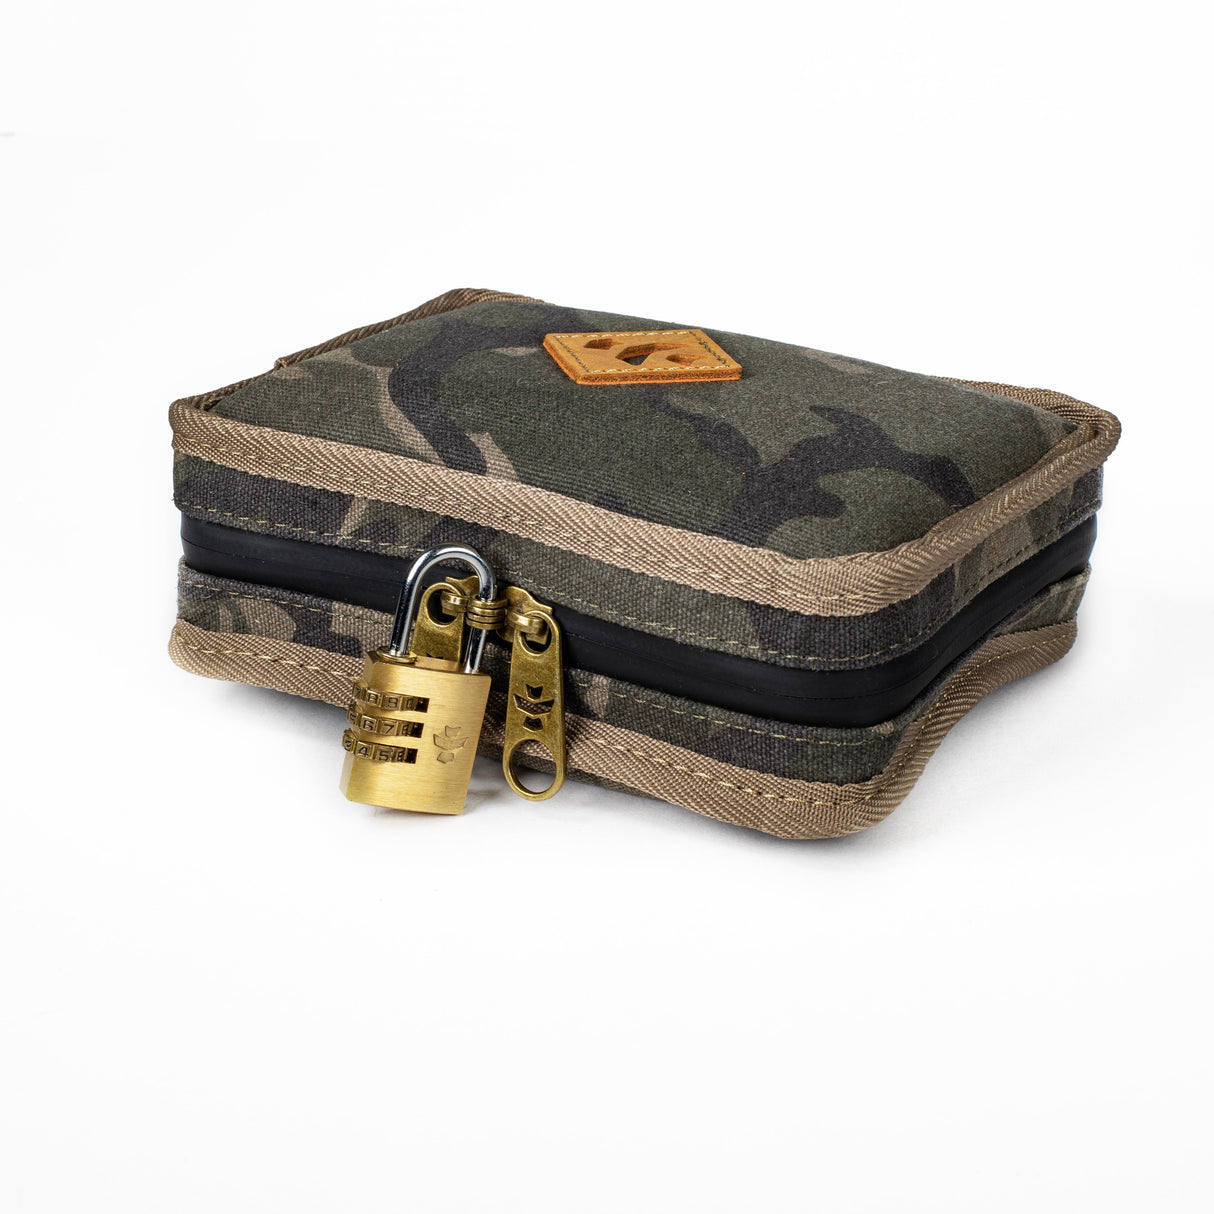 Revelry Supply's The Pipe Kit - Smell Proof Camouflage Case with Lock, Front View